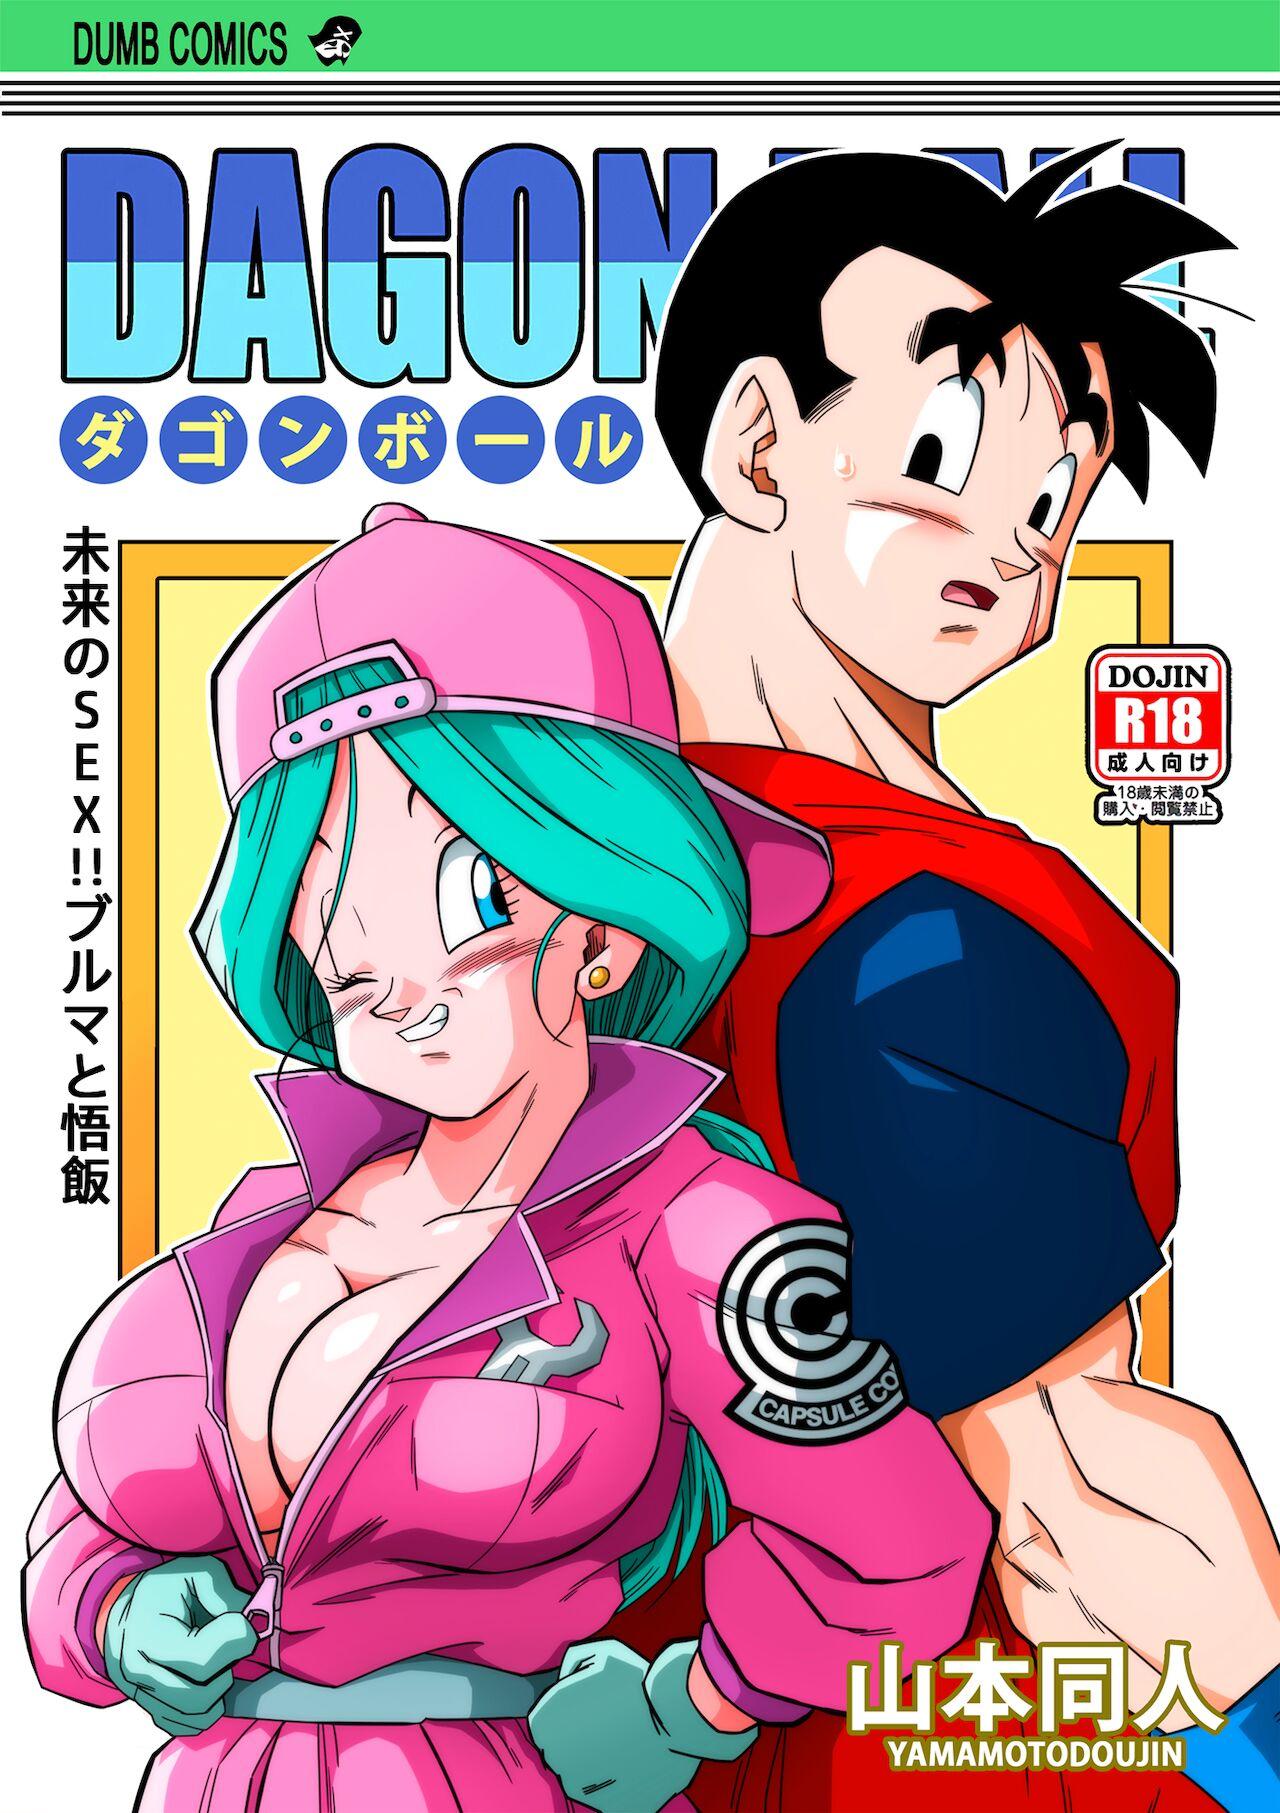 Lost of sex in this Future! - BULMA and GOHAN 0